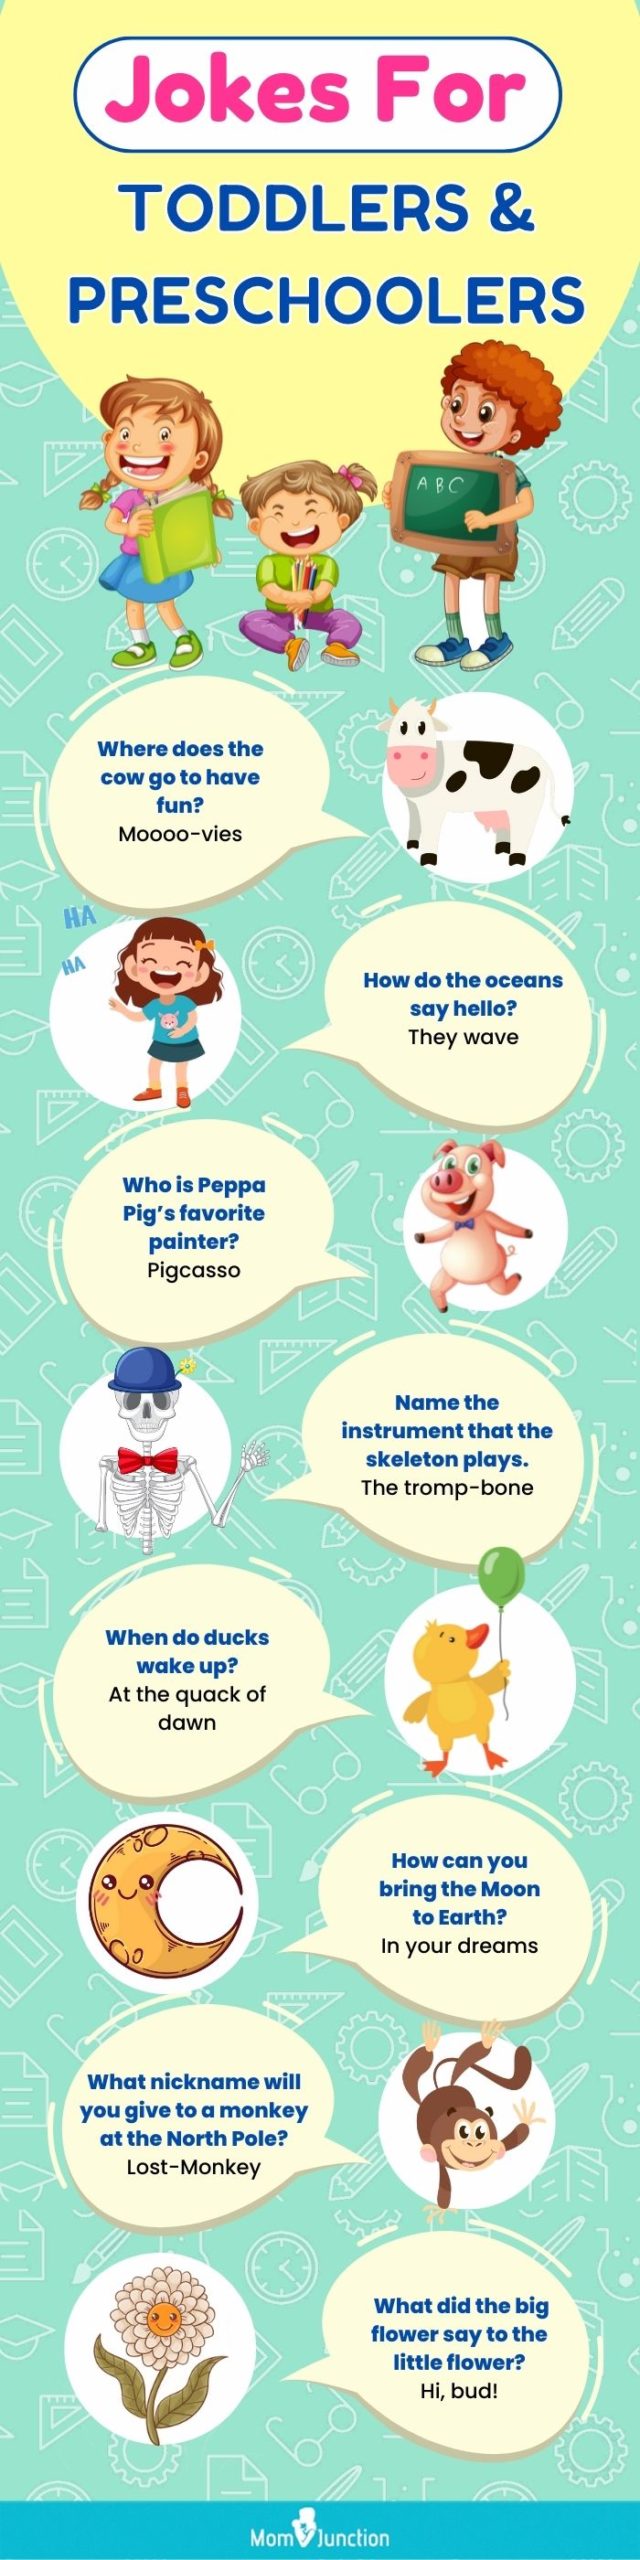 jokes for toddlers and preschoolers (infographic)